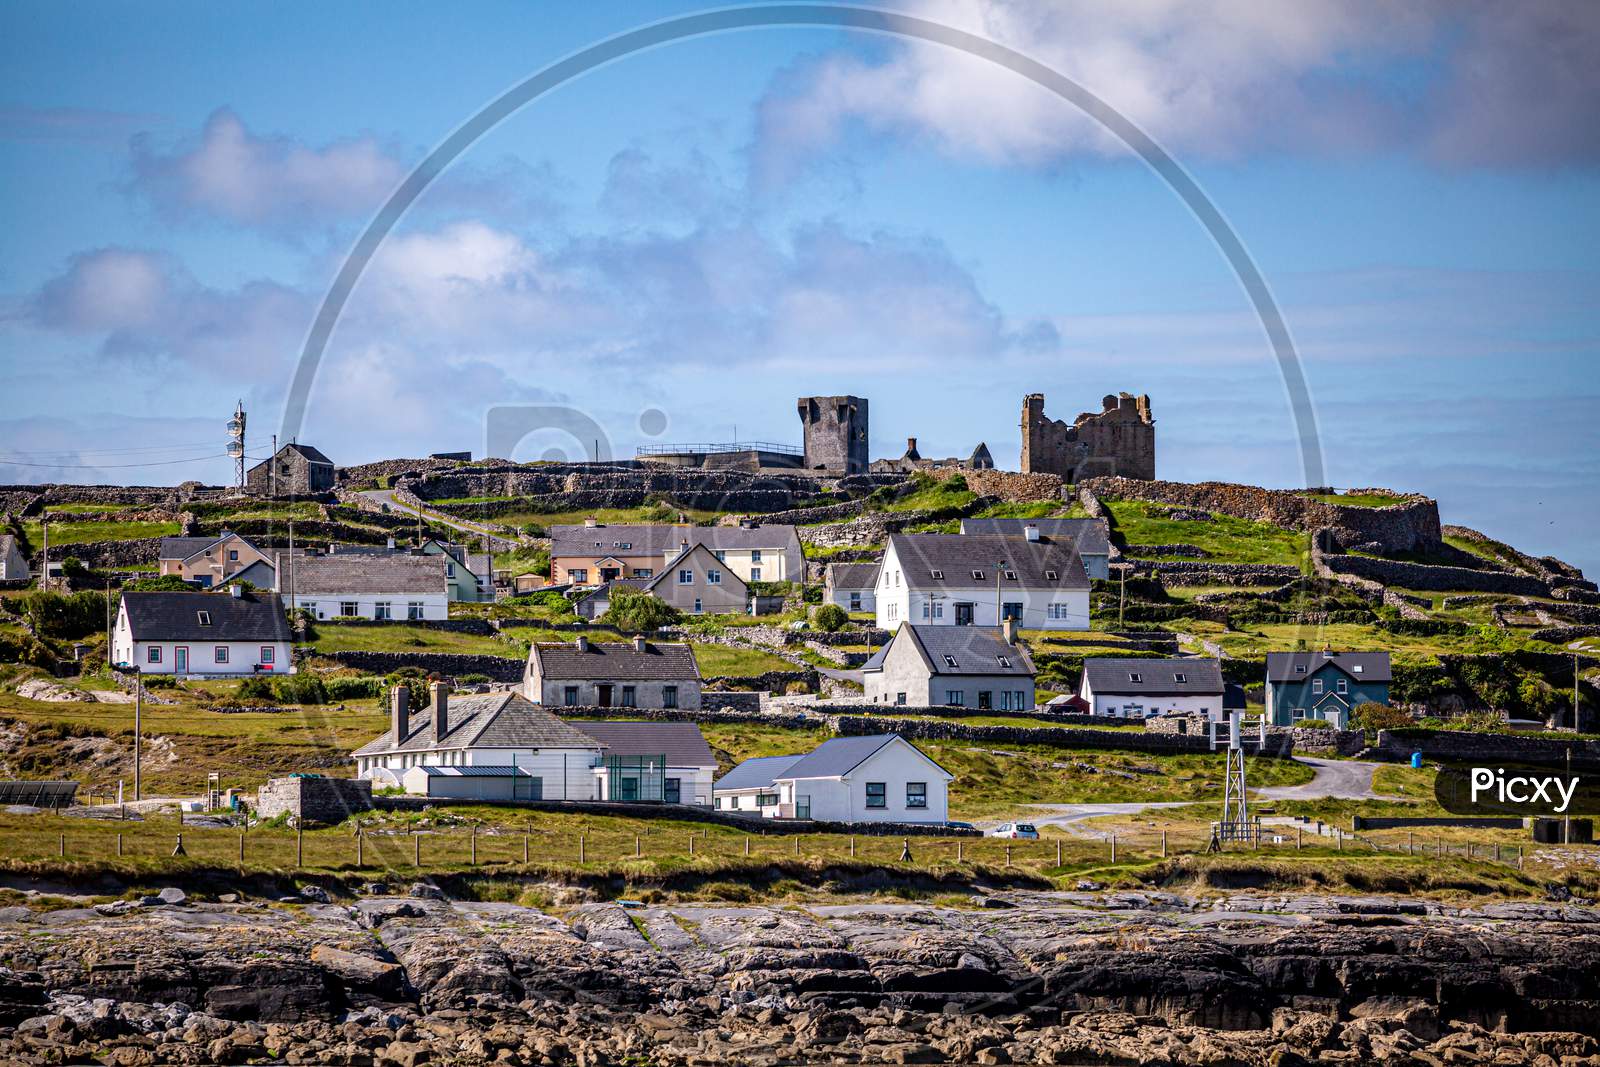 Beautiful View Of The Ruined 15Th Century Castle In A Prehistoric Stone Fort And Houses On The Inis Oirr Island Seen From A Boat, Wonderful Sunny Day In The Aran Islands, Ireland